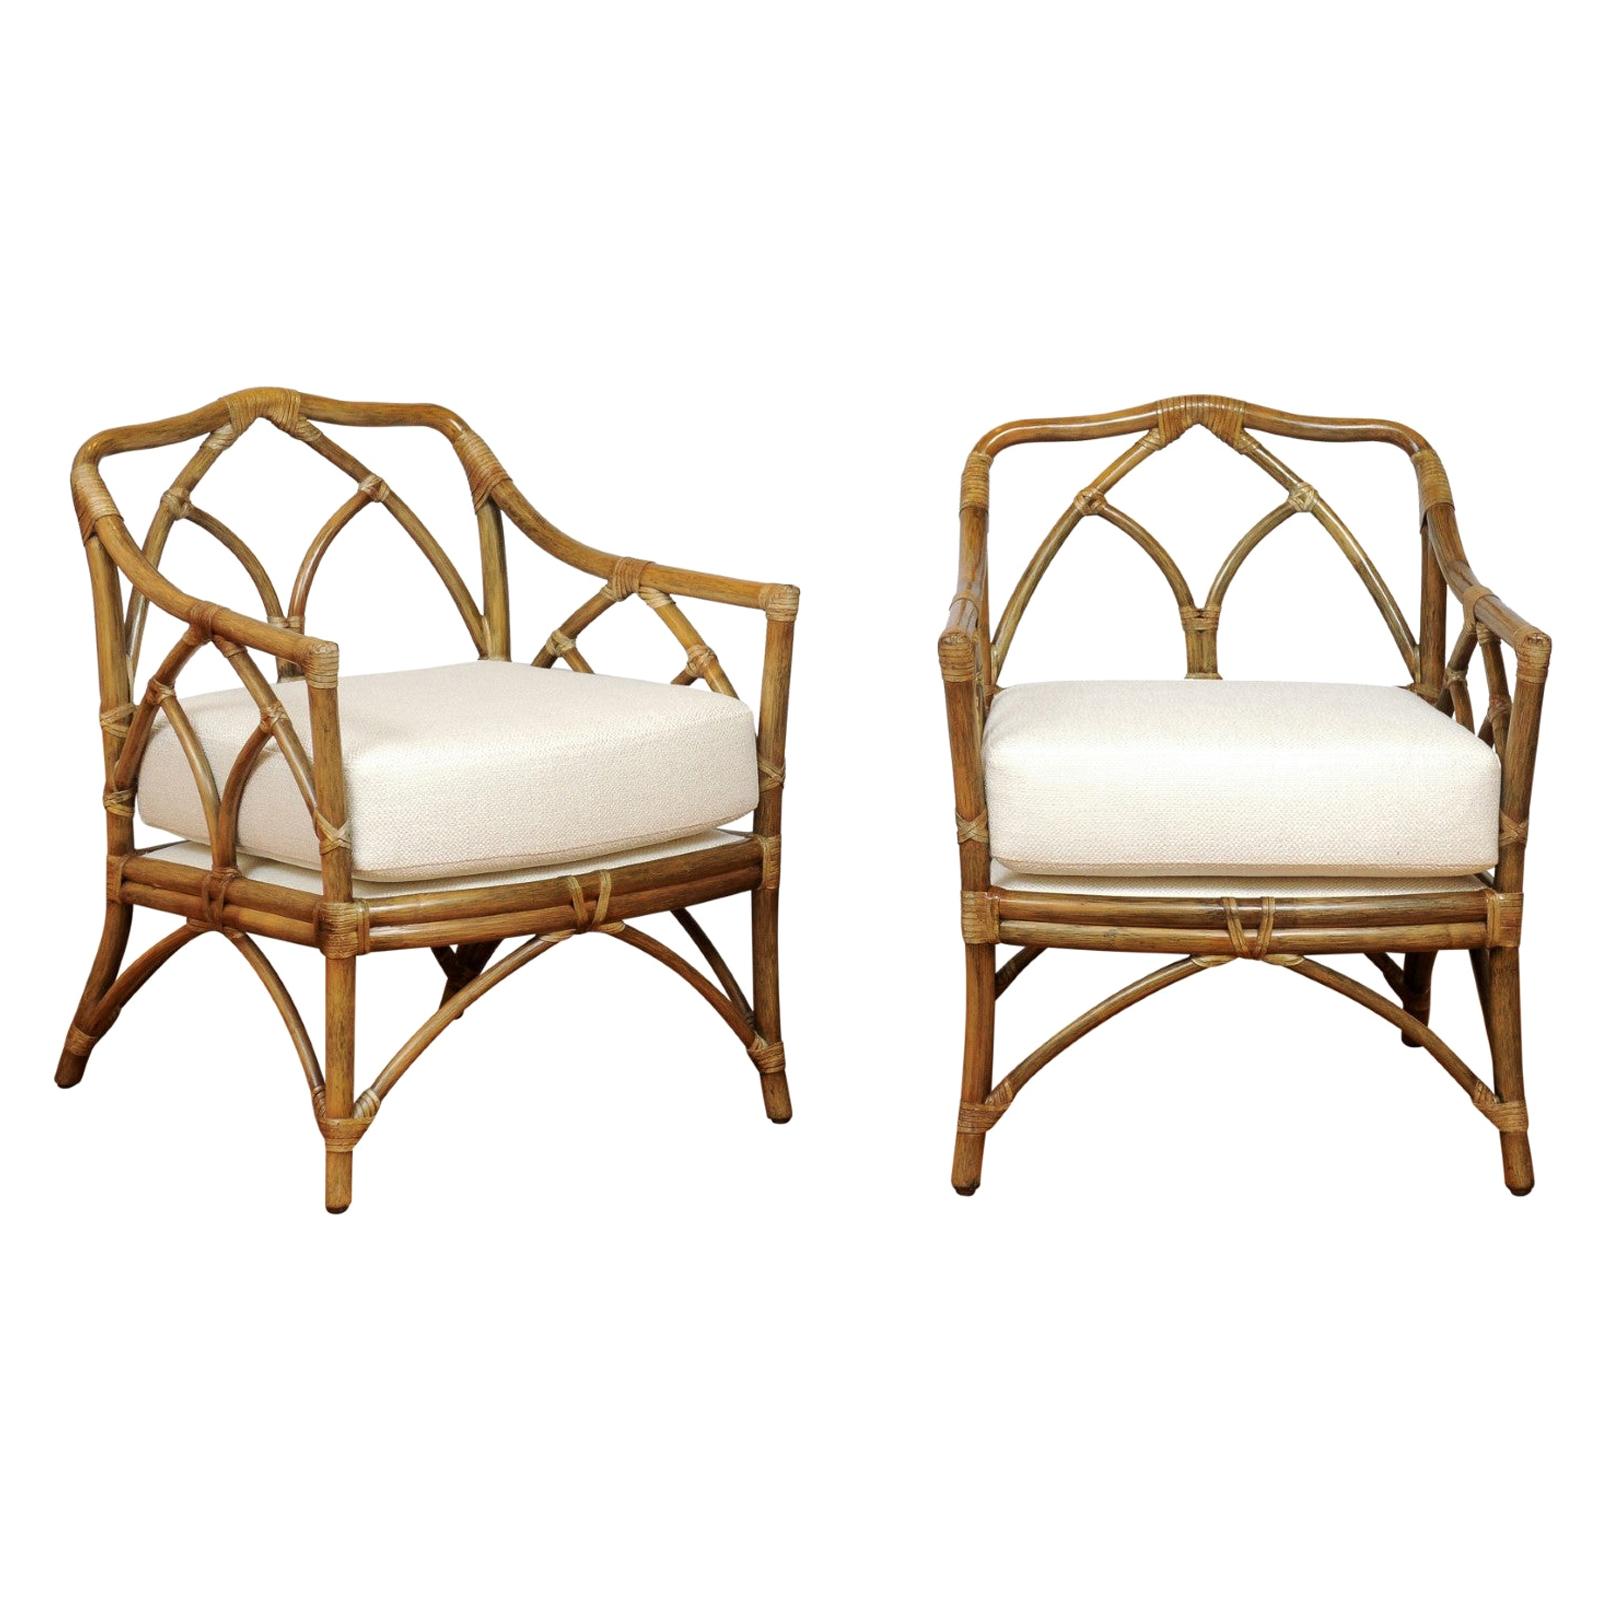 Chic Restored Pair Modern Cathedral Back Loungers by McGuire, circa 1975 For Sale